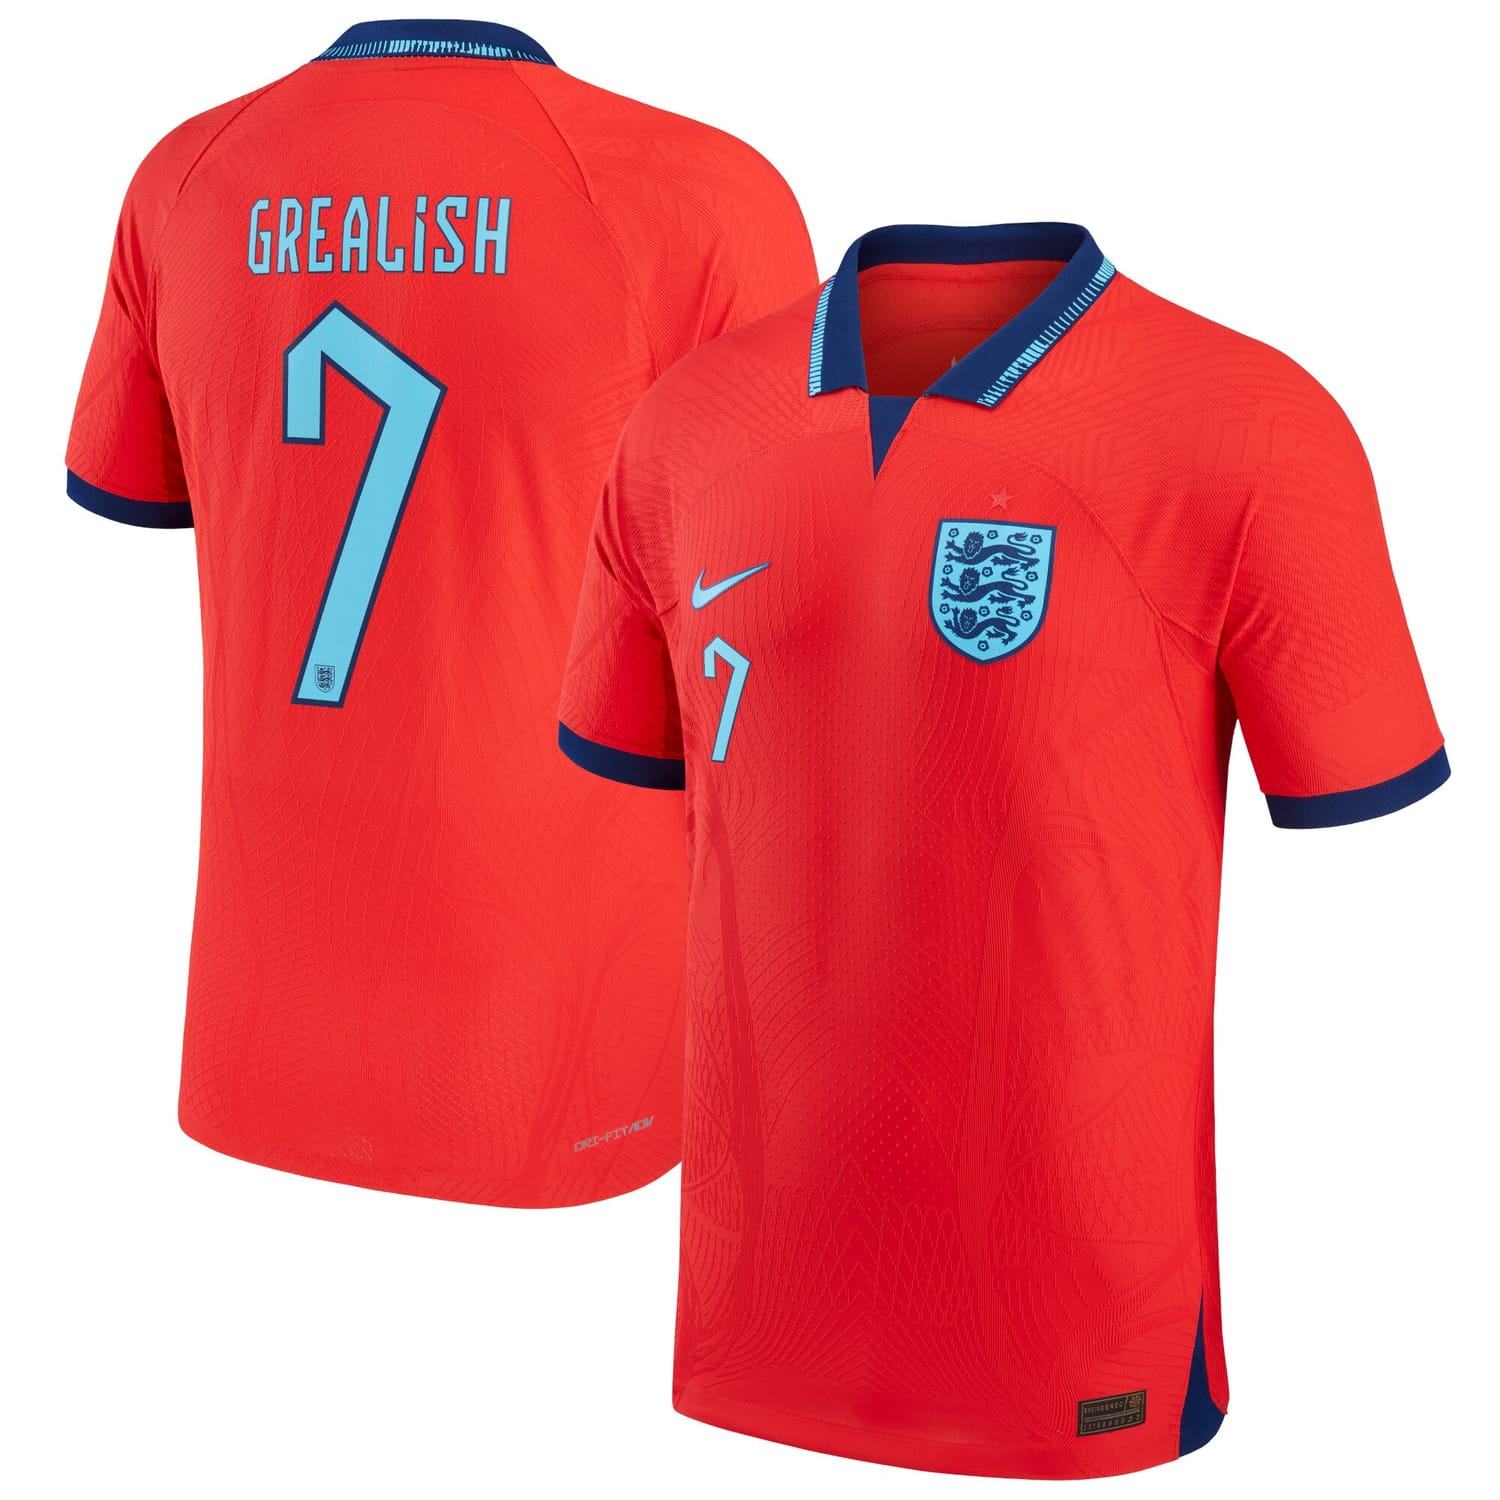 England National Team Away Authentic Jersey Shirt 2022 player Jack Grealish 7 printing for Men